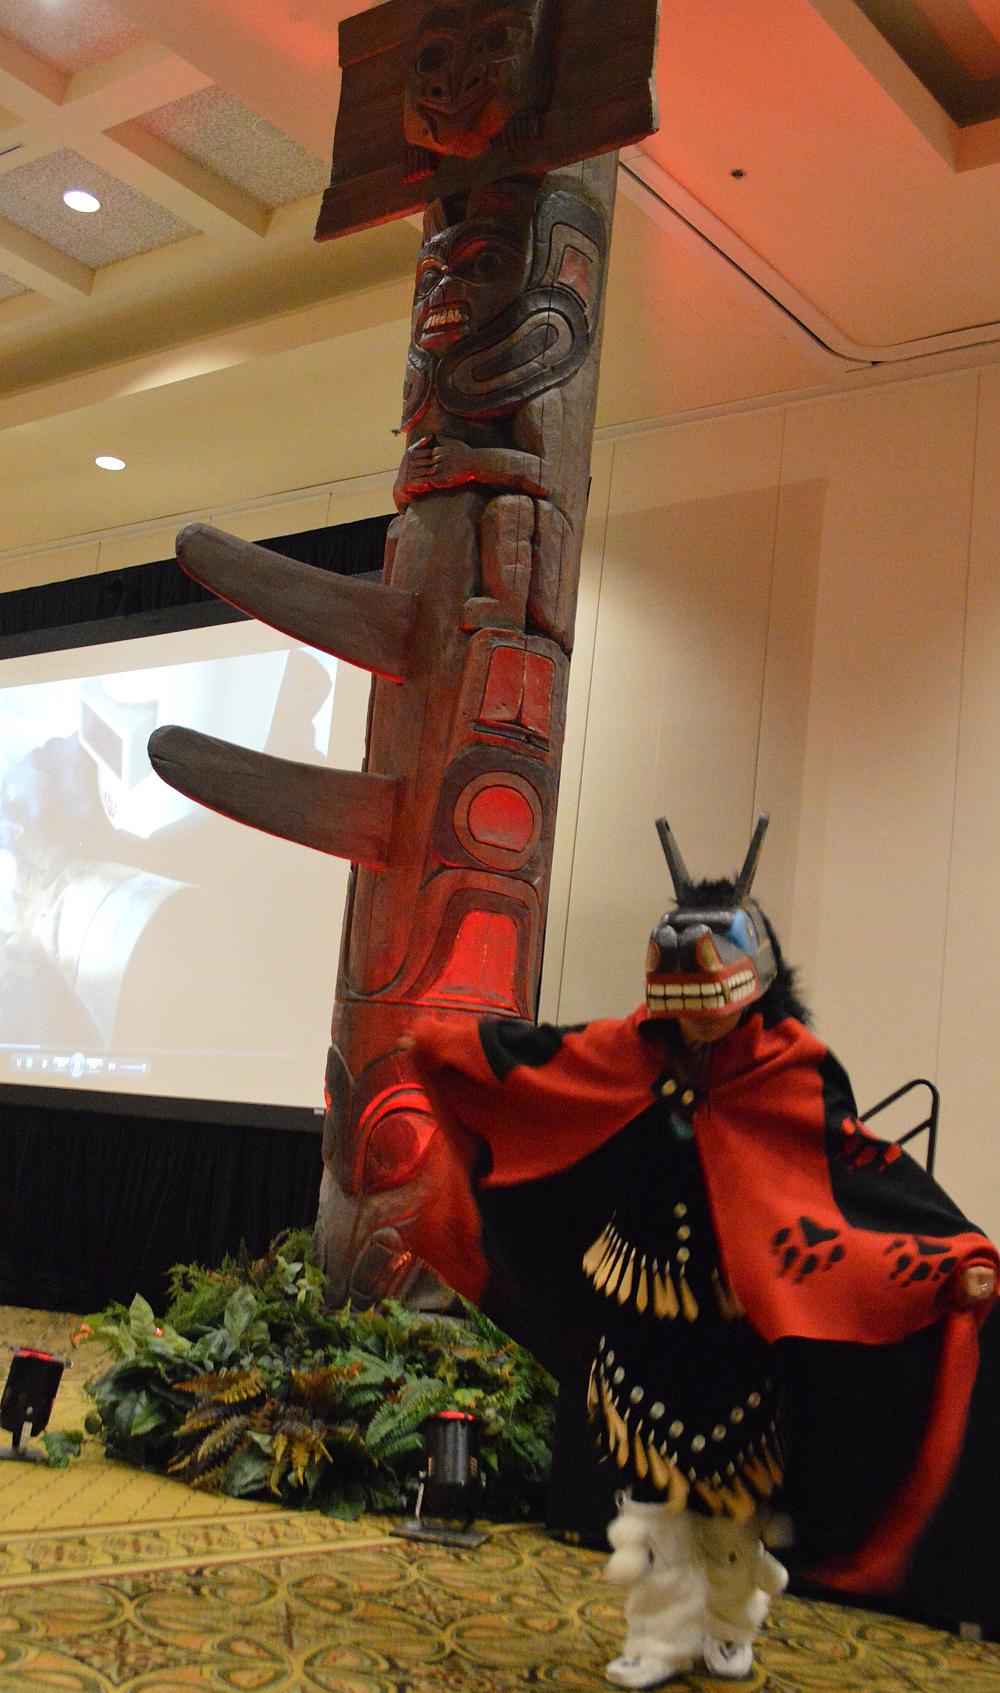 Indigenous entertainment was provided during the first joint CanWeld Conference between the Canadian Welding Association (CWA) and the International Institute of Welding (IIW) International Congress. 